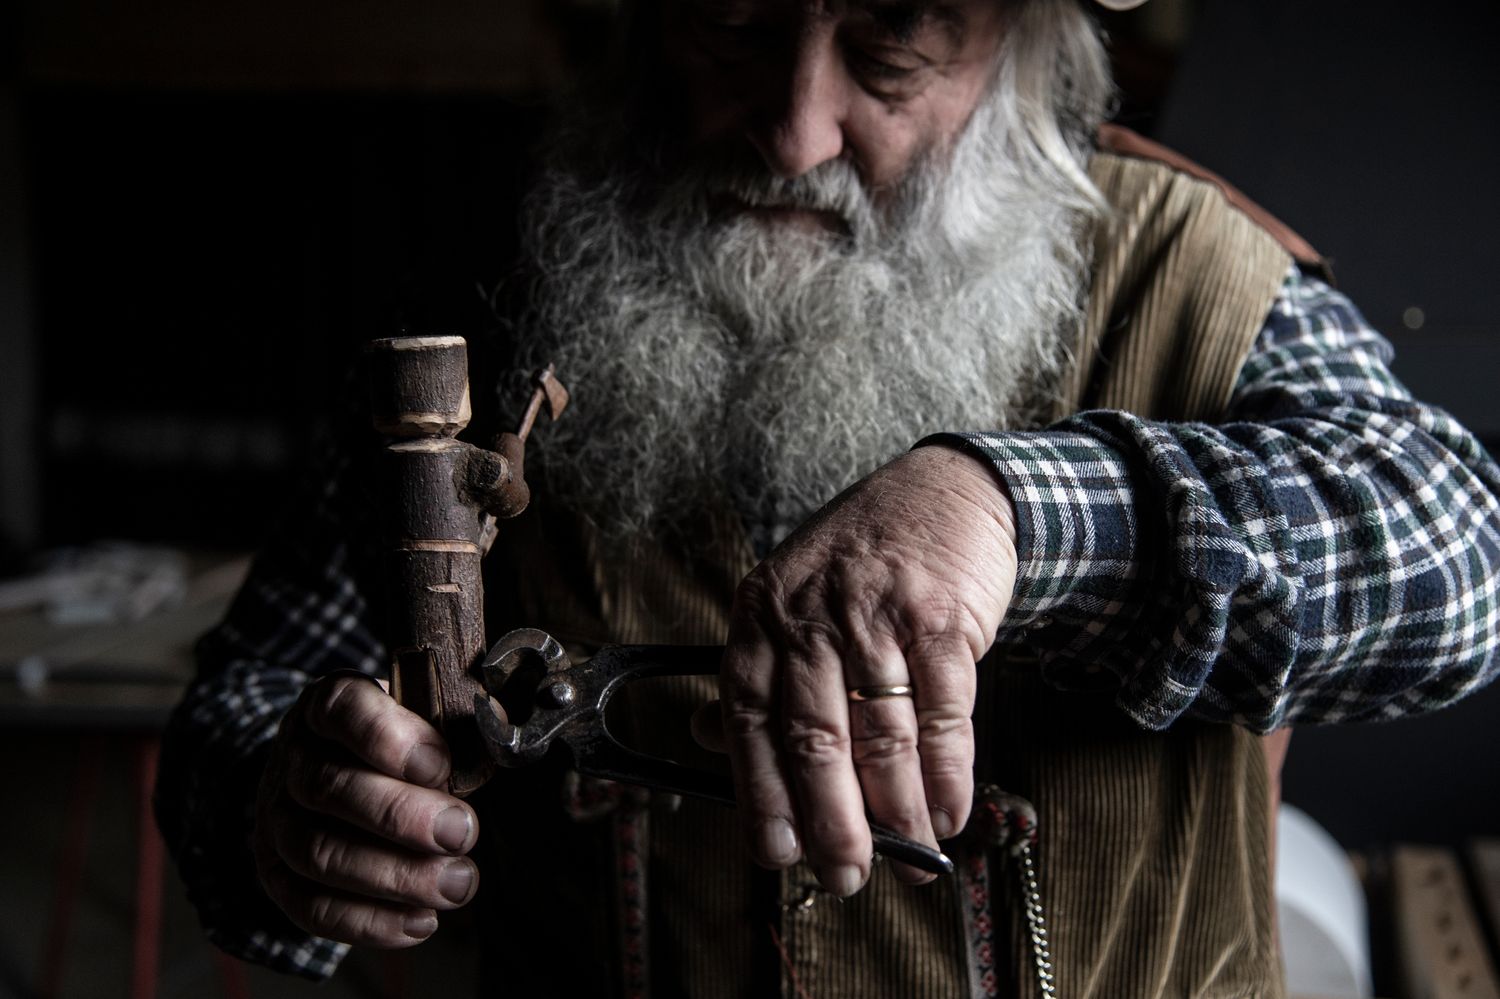 IN PICS: An Italian toy story of a retired mechanic carving old ...